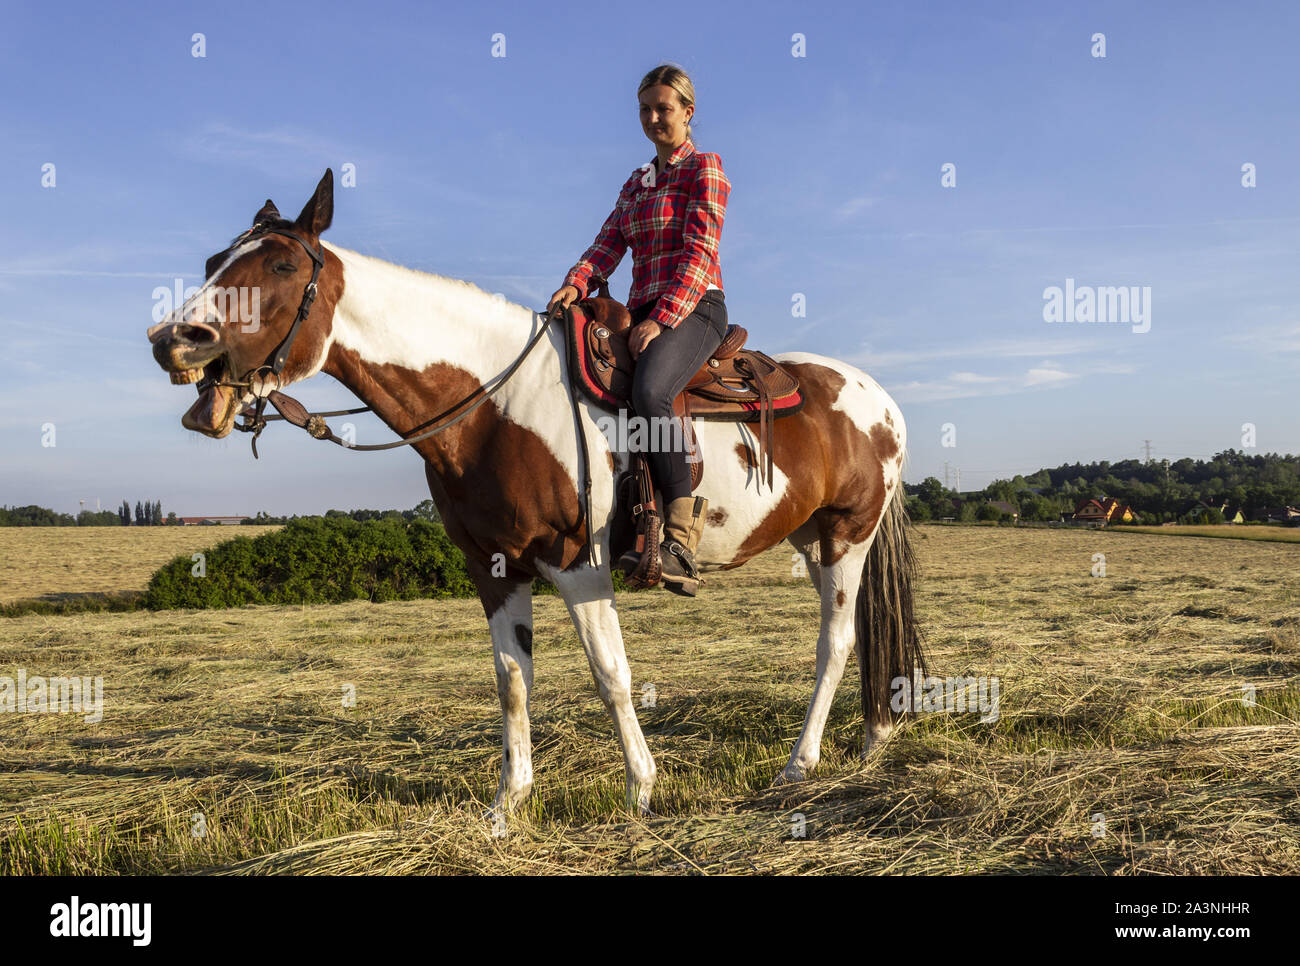 A young girl rides a horse on a pasture near a ranch and laughing horse ...